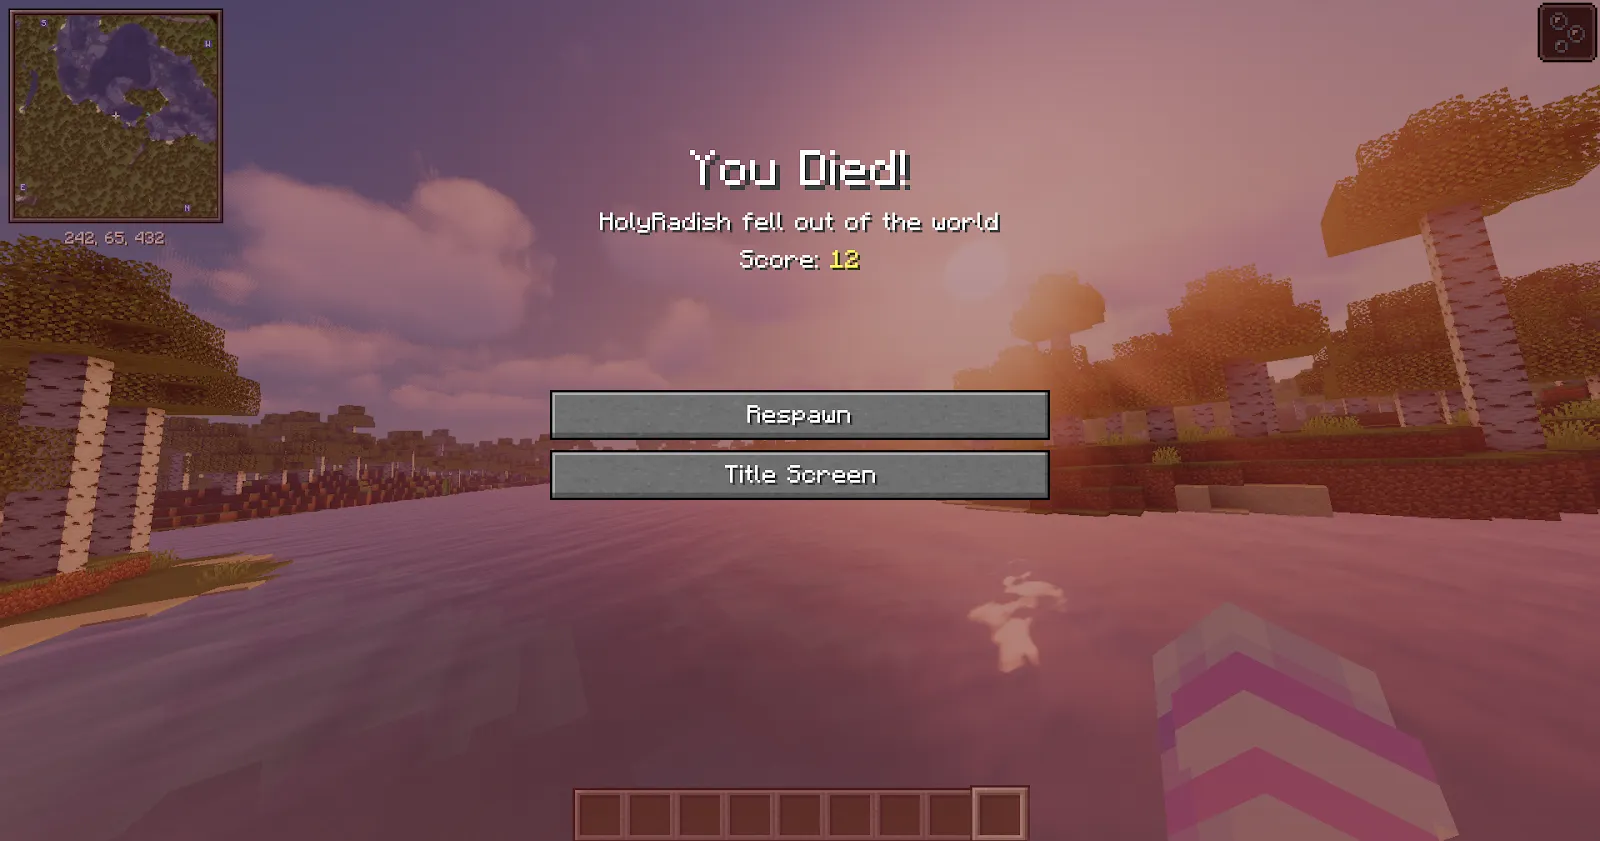 Minecraft 'You Died' screen